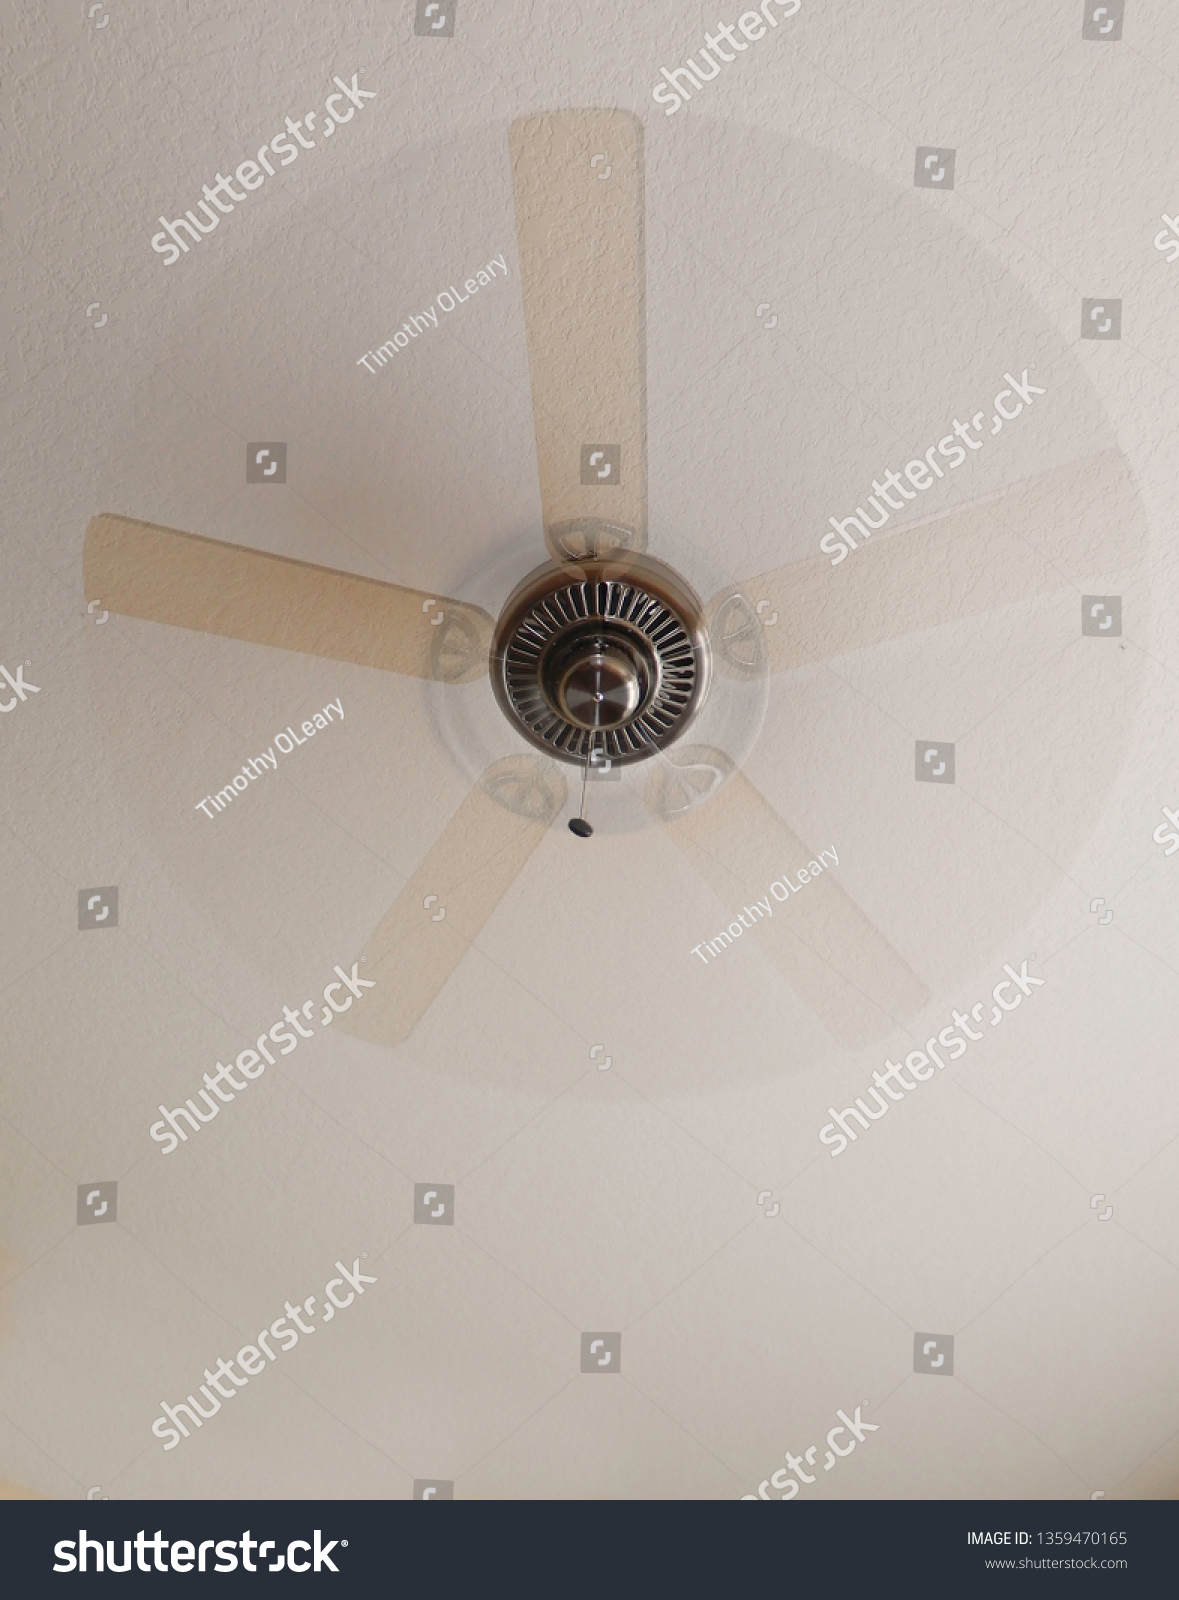 Ceiling Fan Designed Work Decor Home Stock Photo Edit Now